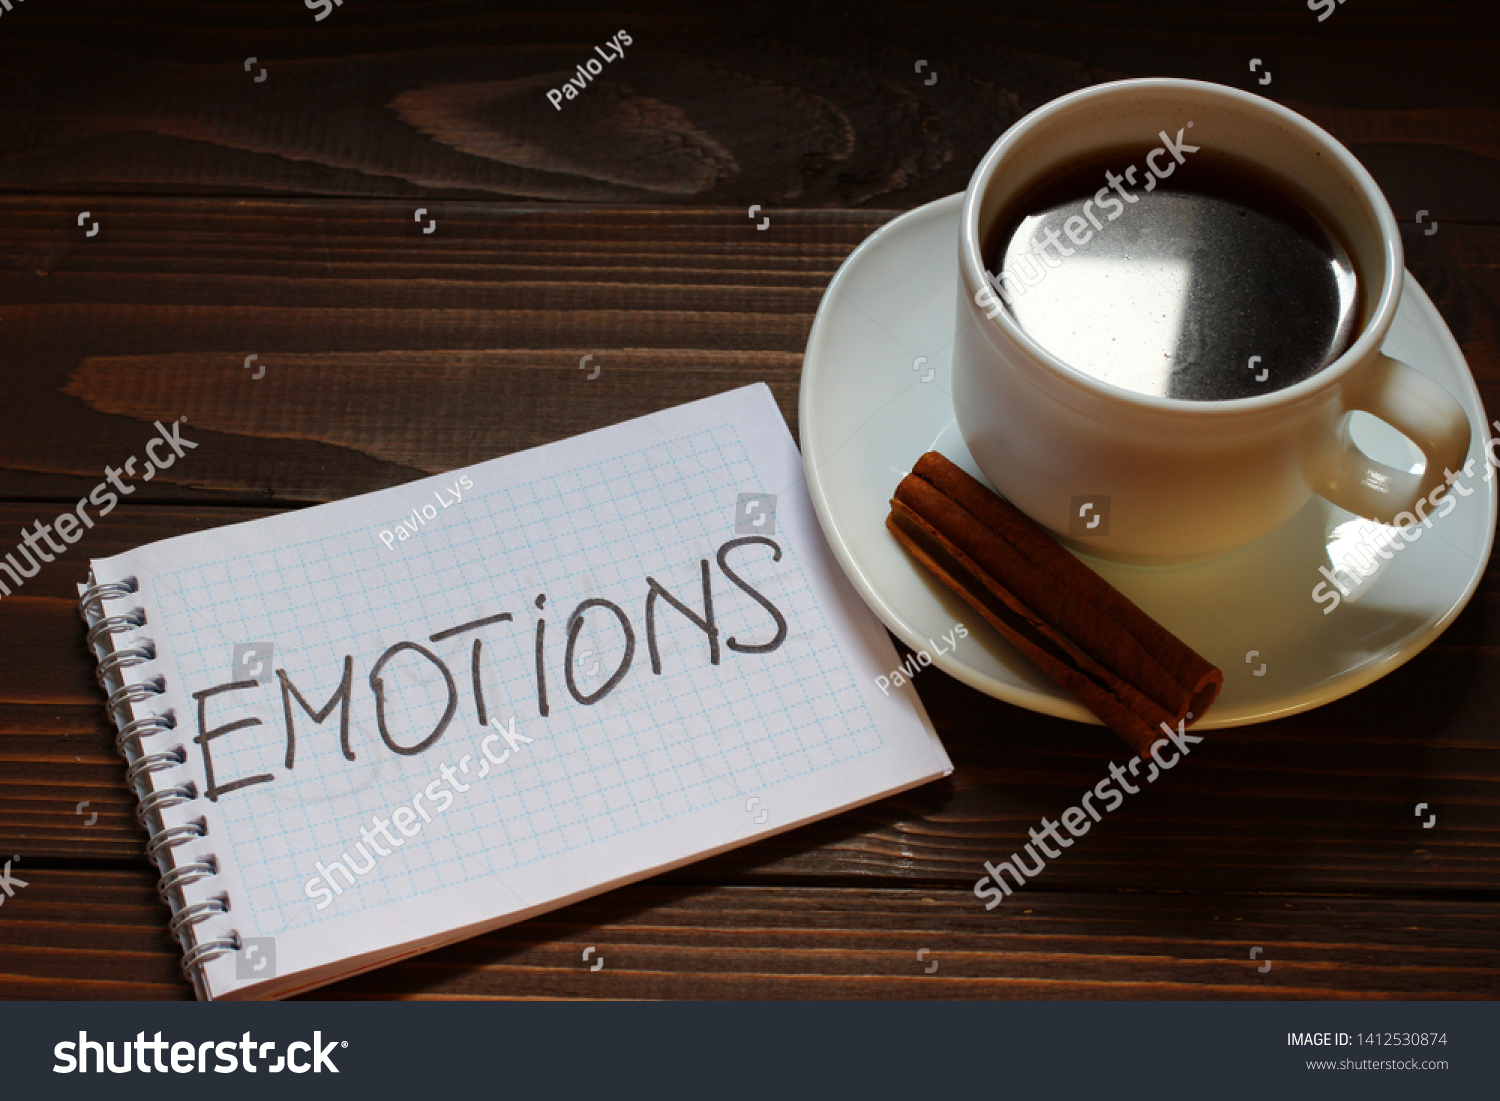 Emotions inscription and word in a notebook near a cup of coffee #1412530874